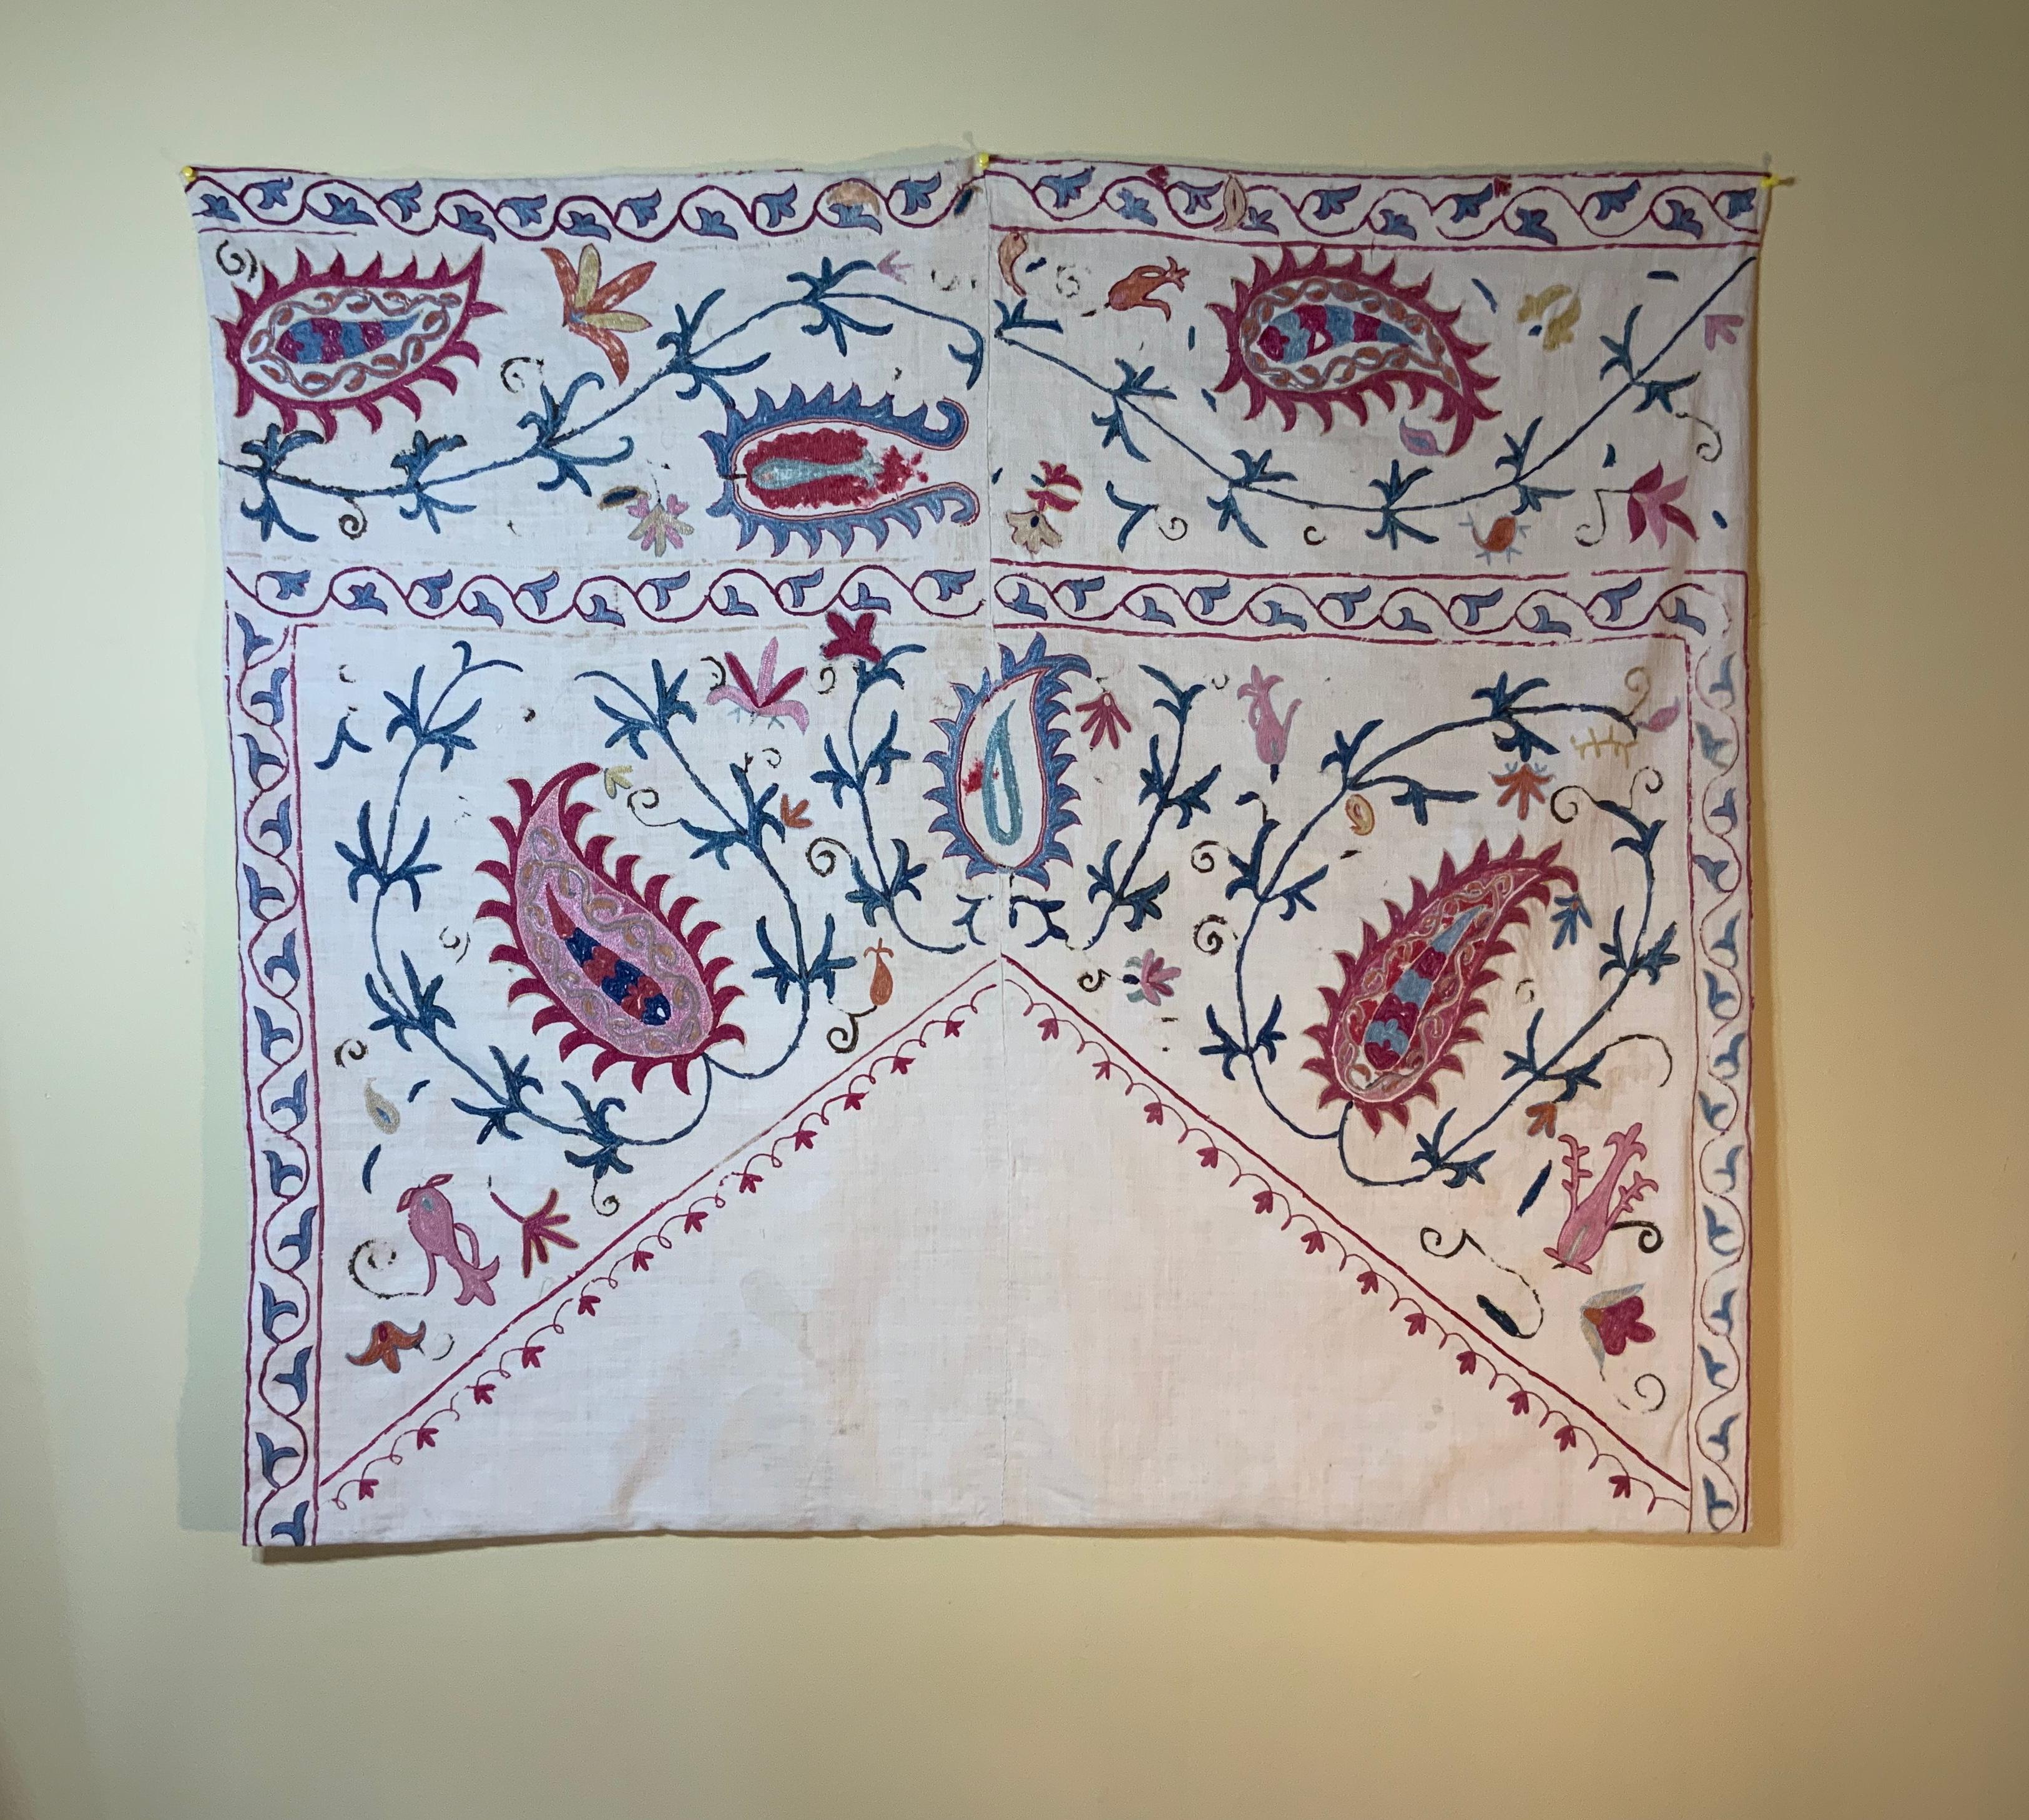 Antique Suzani textile made of hand embroidery, intricate scrolling vines and flowers motifs on a handwoven cotton background. Professionally backed with fine silk textile.
Could use as wall hanging or on top of table or couch.
Exquisite object of